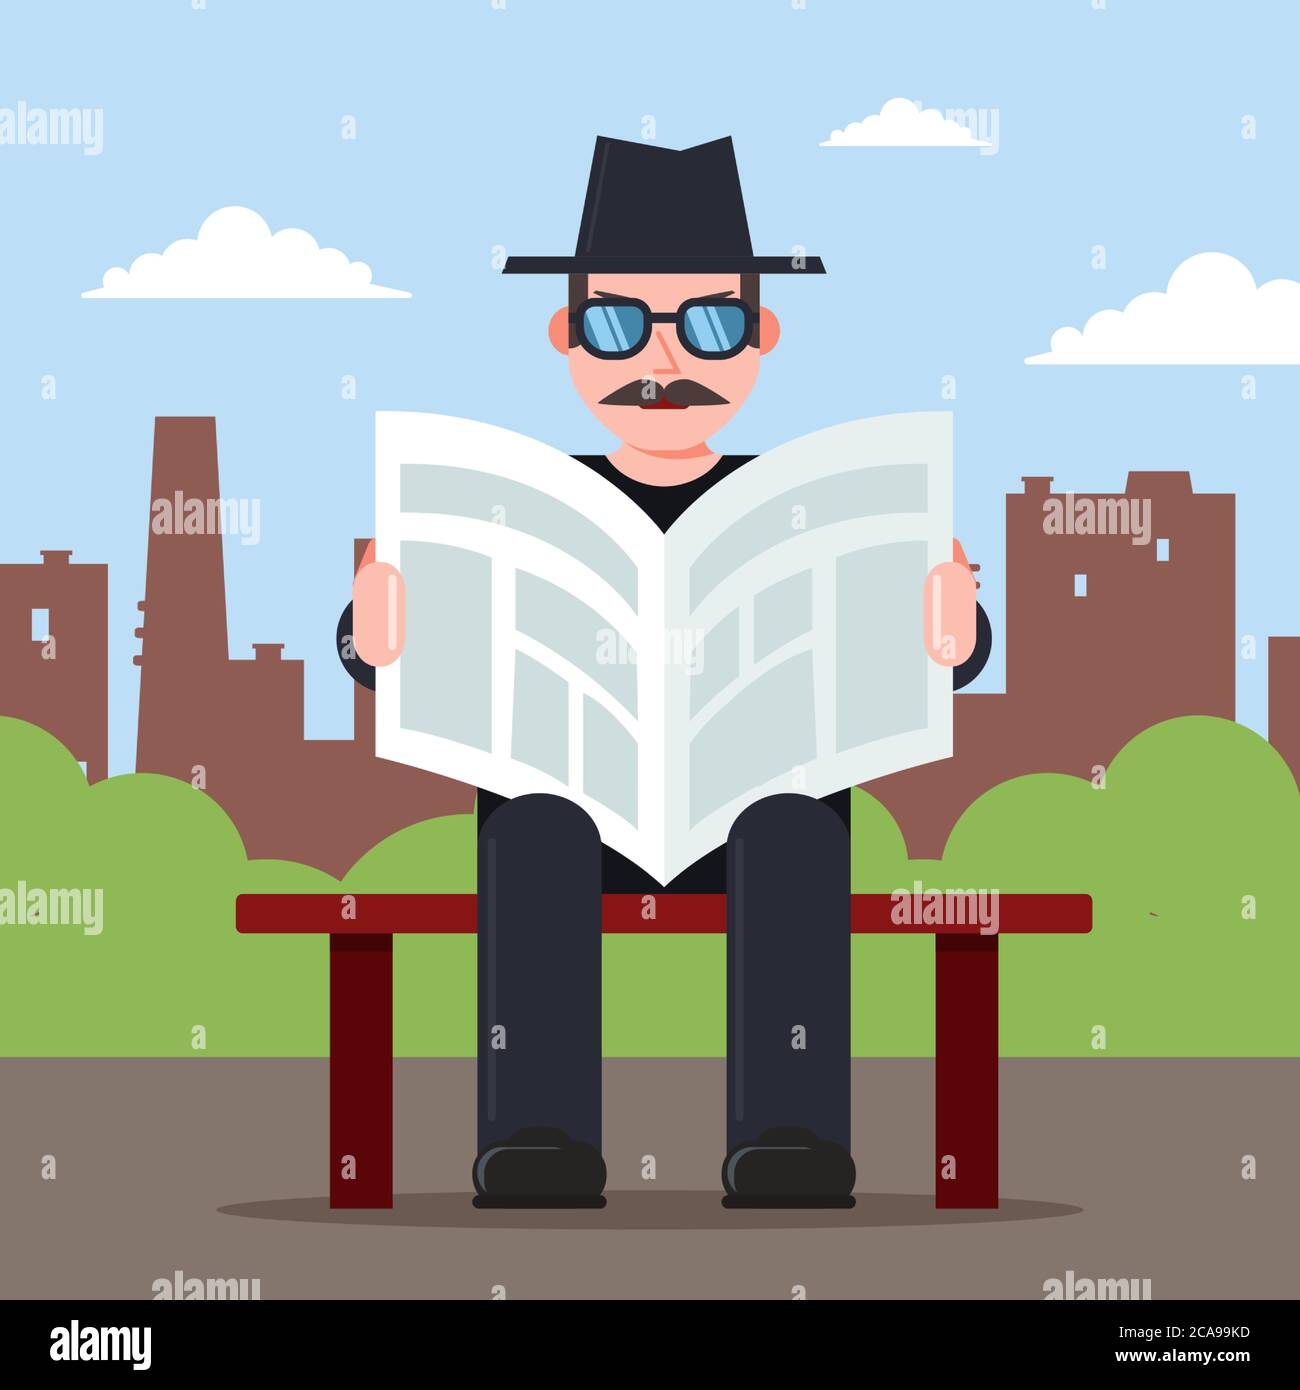 spy sits on a bench with a newspaper in his hands and a hat. secret observer character. Flat vector illustration. Stock Vector